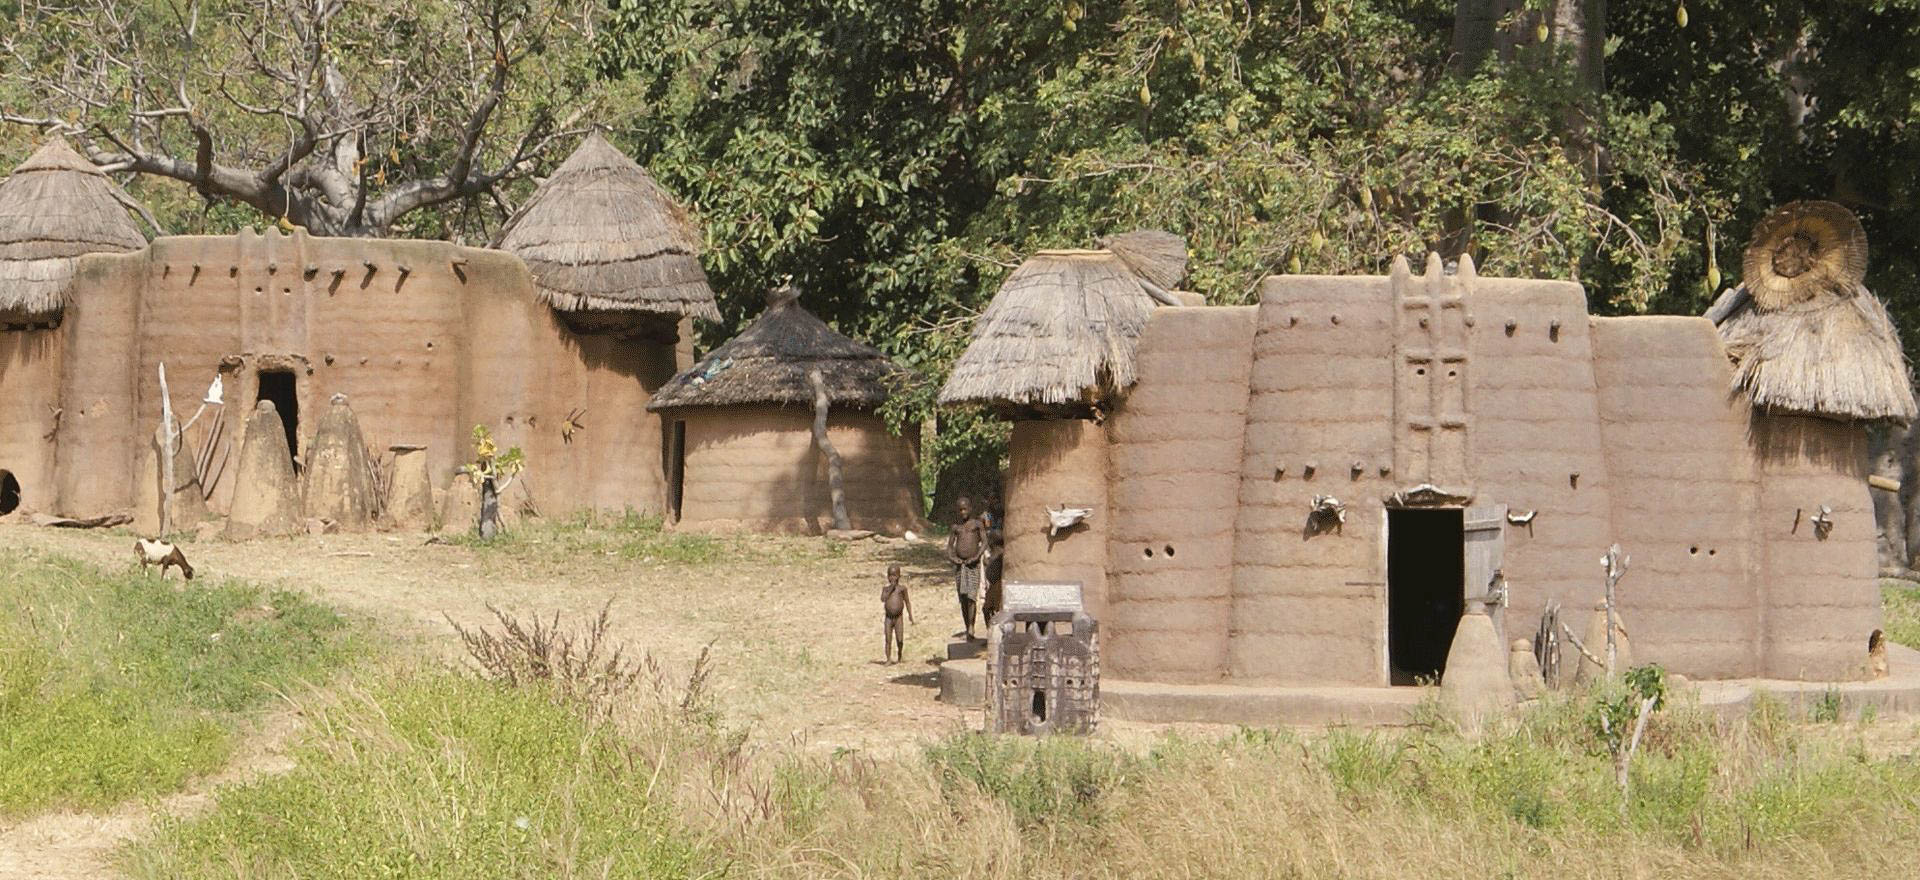 Tamberma villages in northern Togo - Togo Holidays and Tours